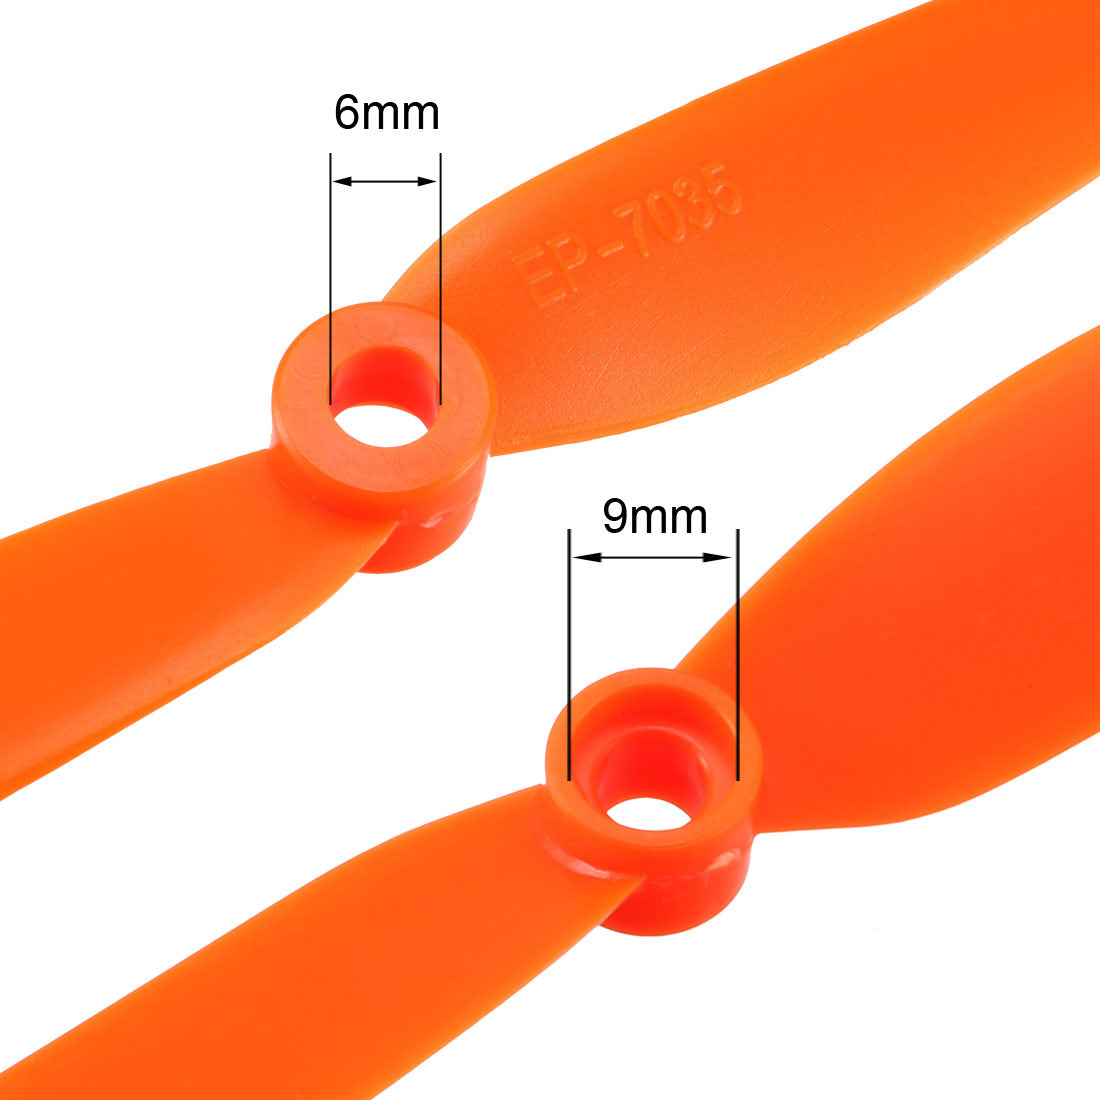 uxcell Uxcell RC Propellers  7035 7x3.5 Inch 2-Vane Fixed-Wing for Airplane Toy, Nylon Orange 2pcs with Adapter Rings